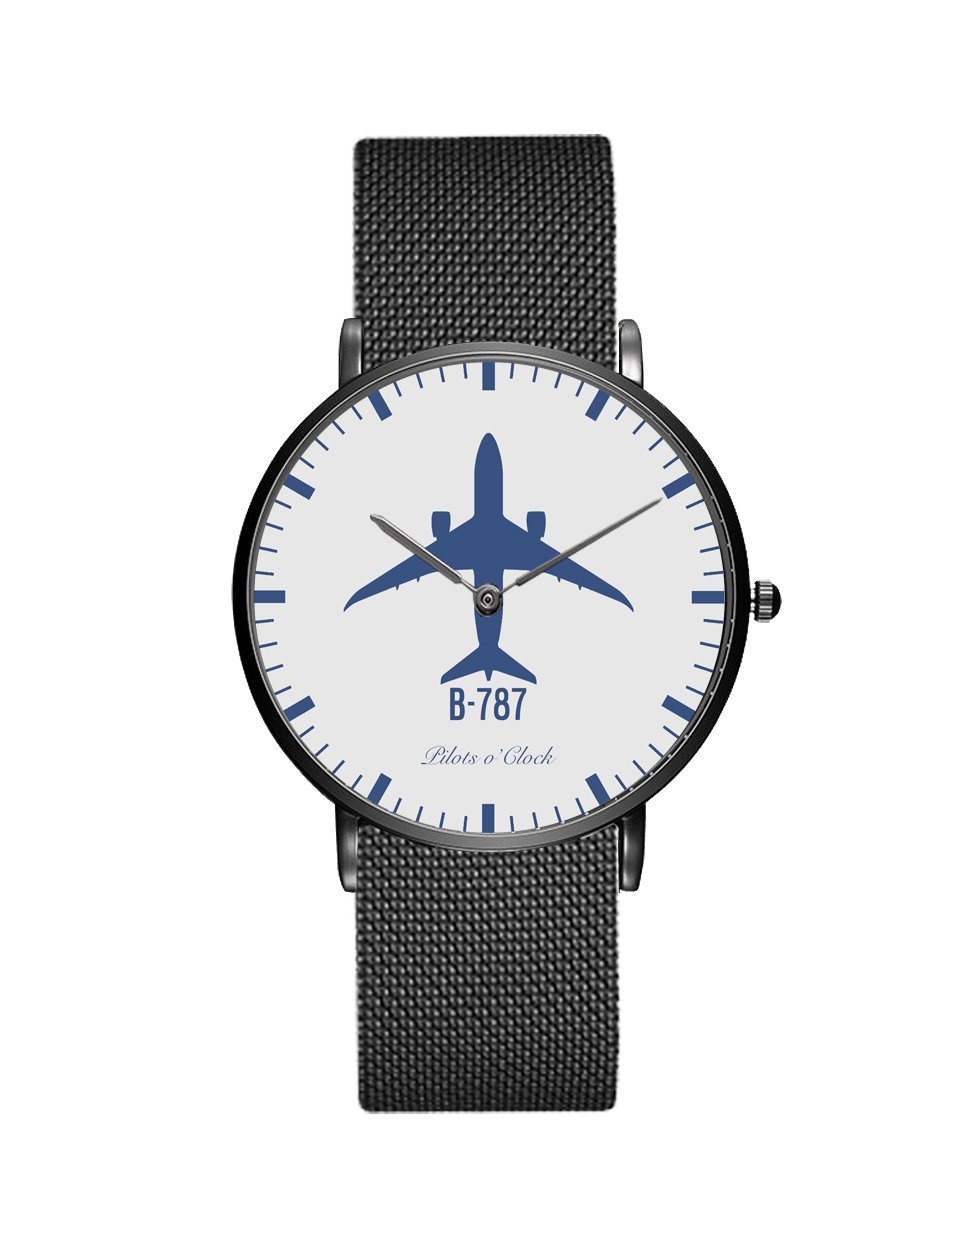 Boeing 787 Stainless Steel Strap Watches Pilot Eyes Store Black & Stainless Steel Strap 